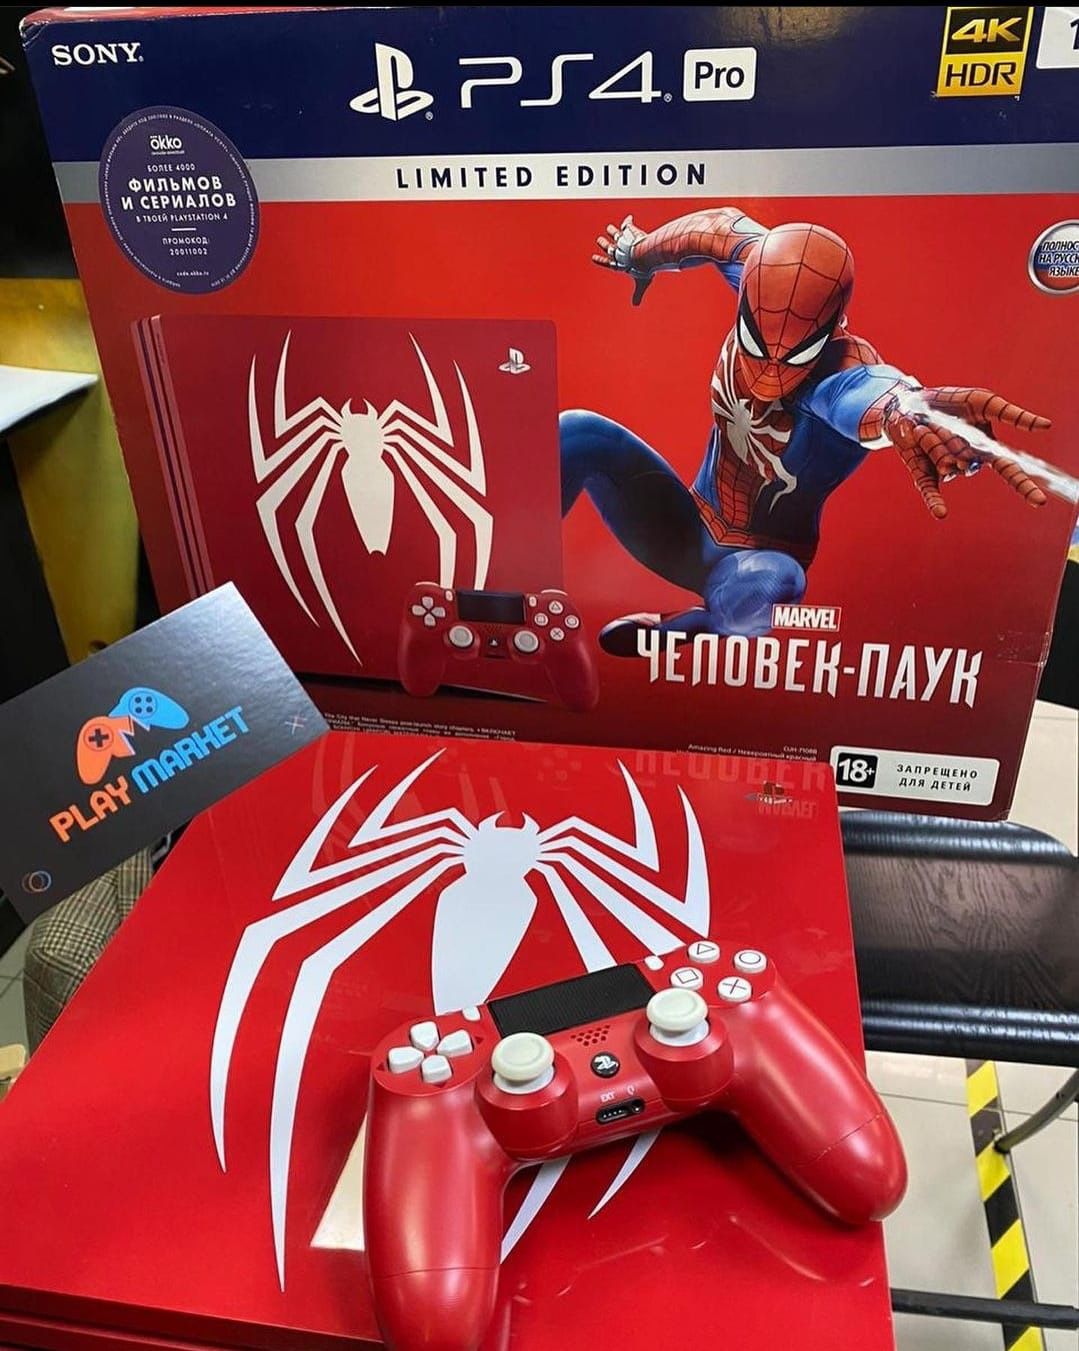 Play Station 4 Pro, Spider-Man Edition, Cords, Headphones And A Controller 